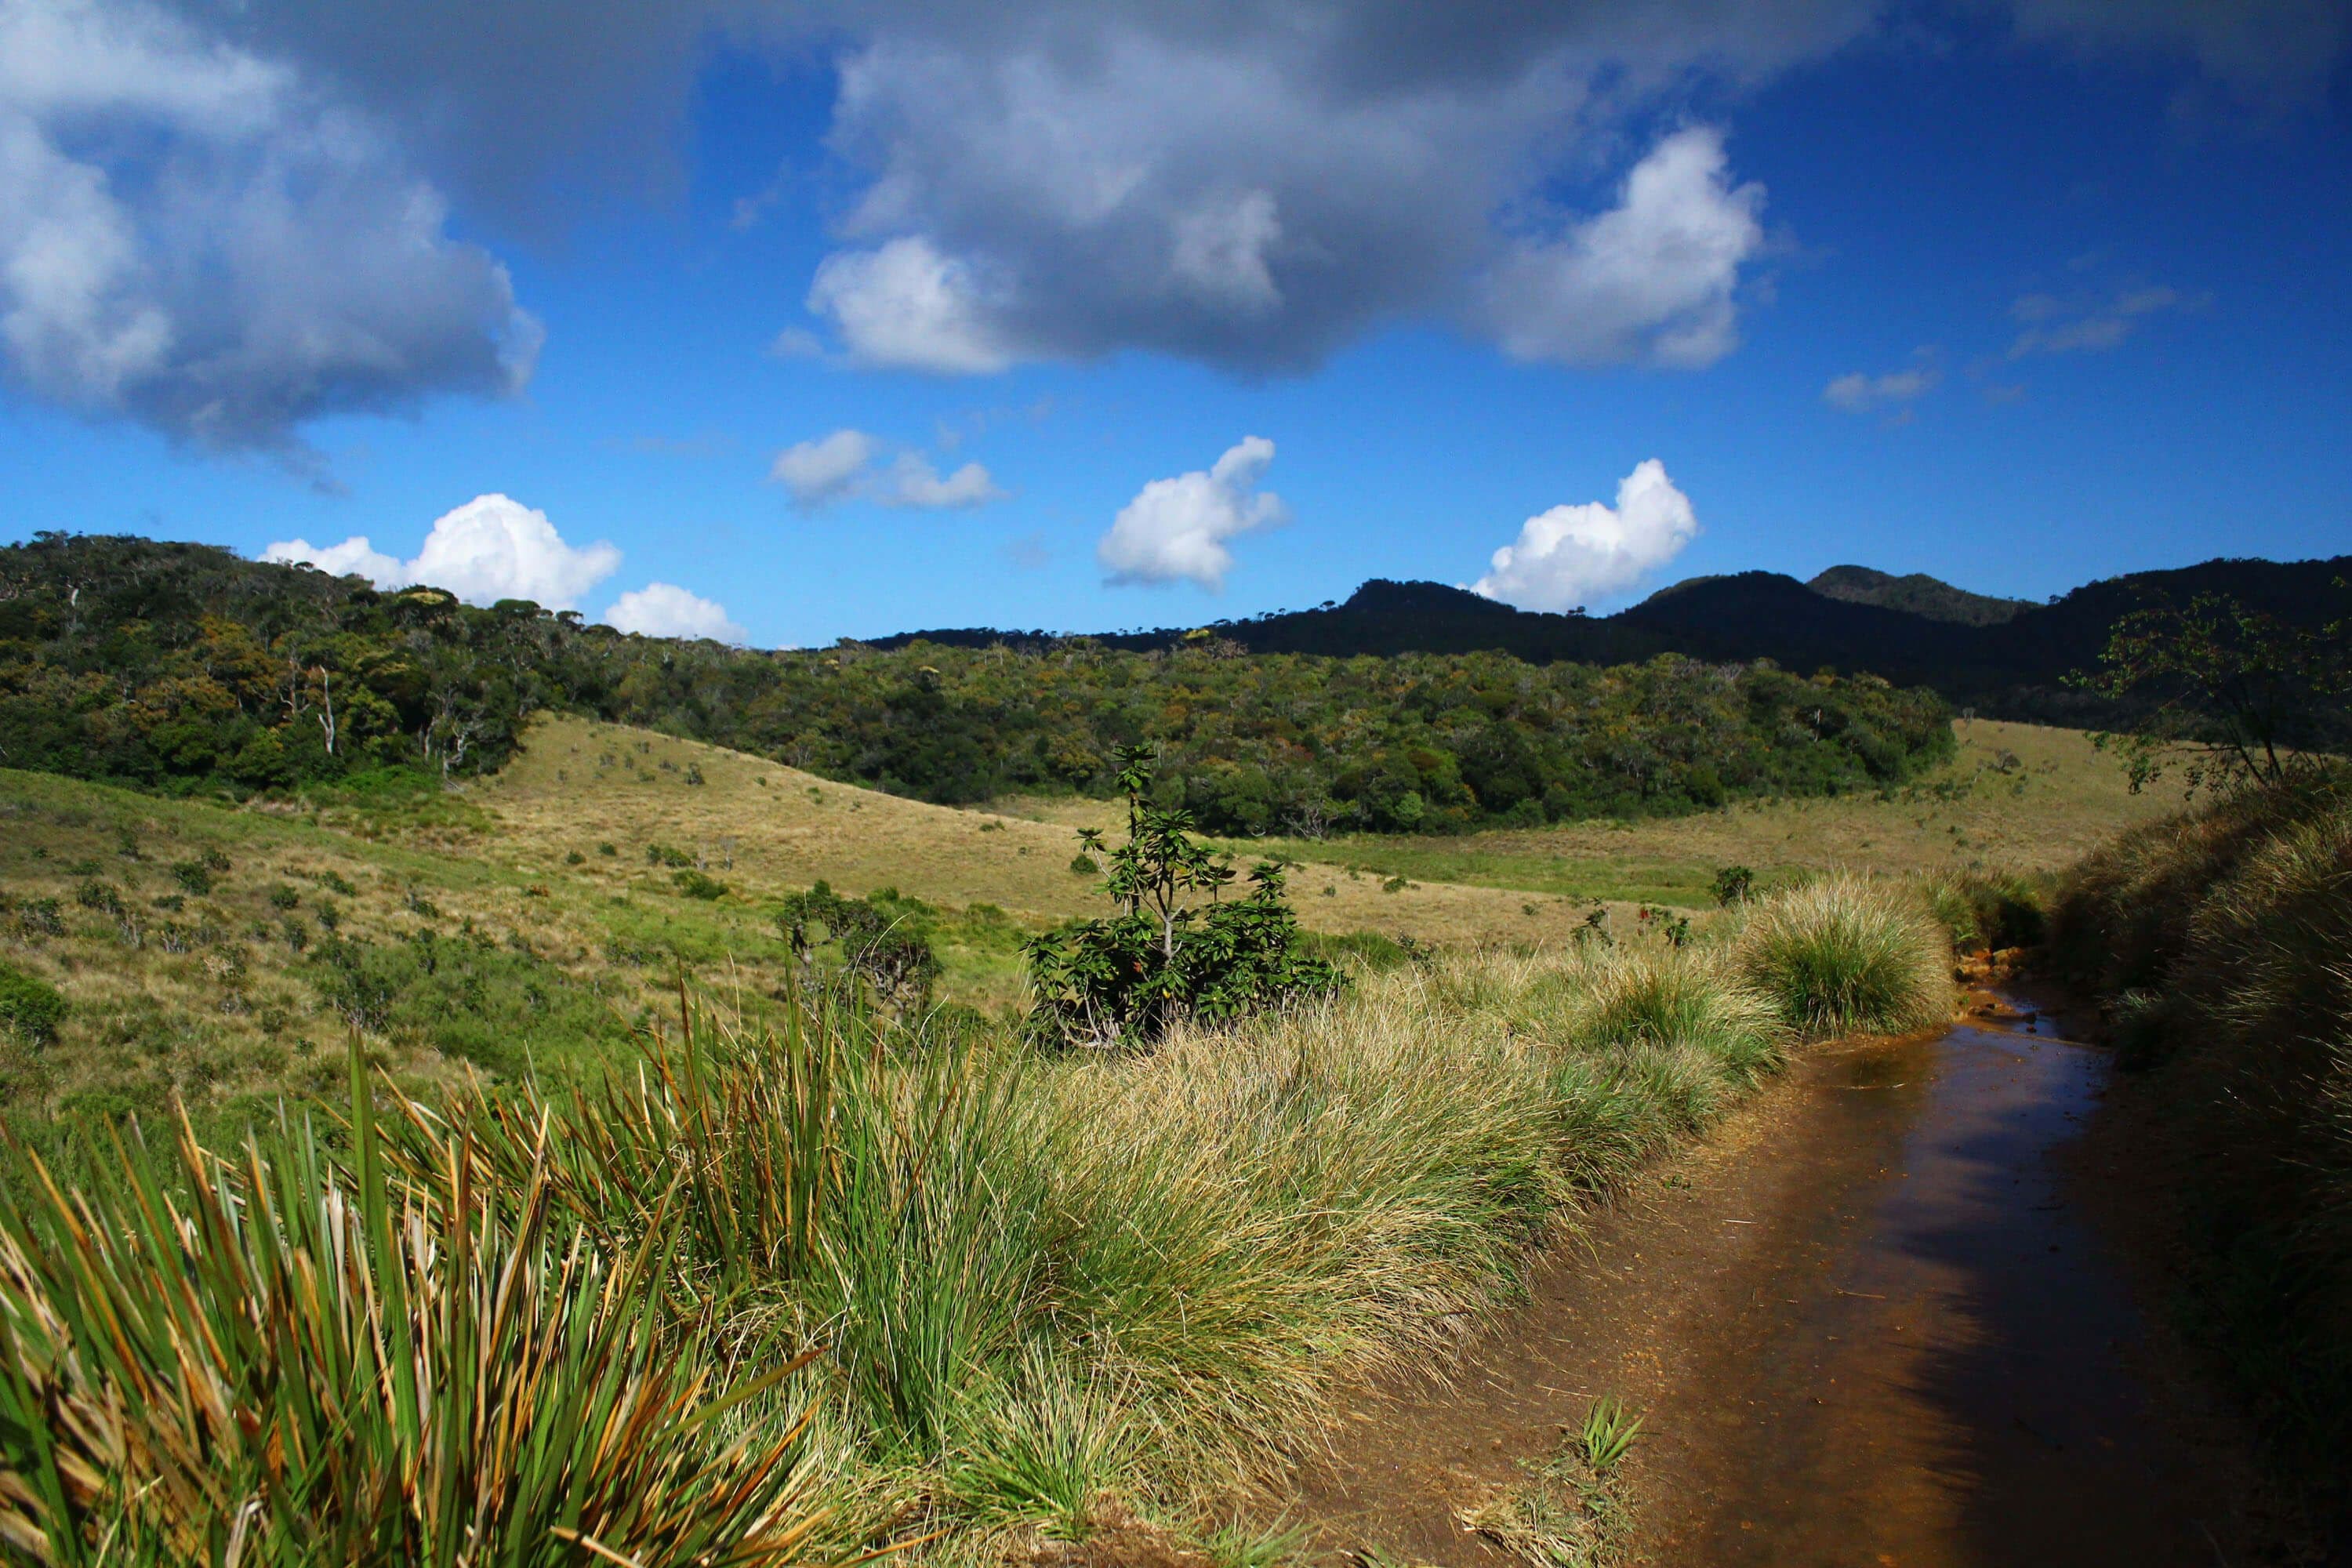  A photo of Horton Plains which have the endemic flora and fauna in Sri Lanka